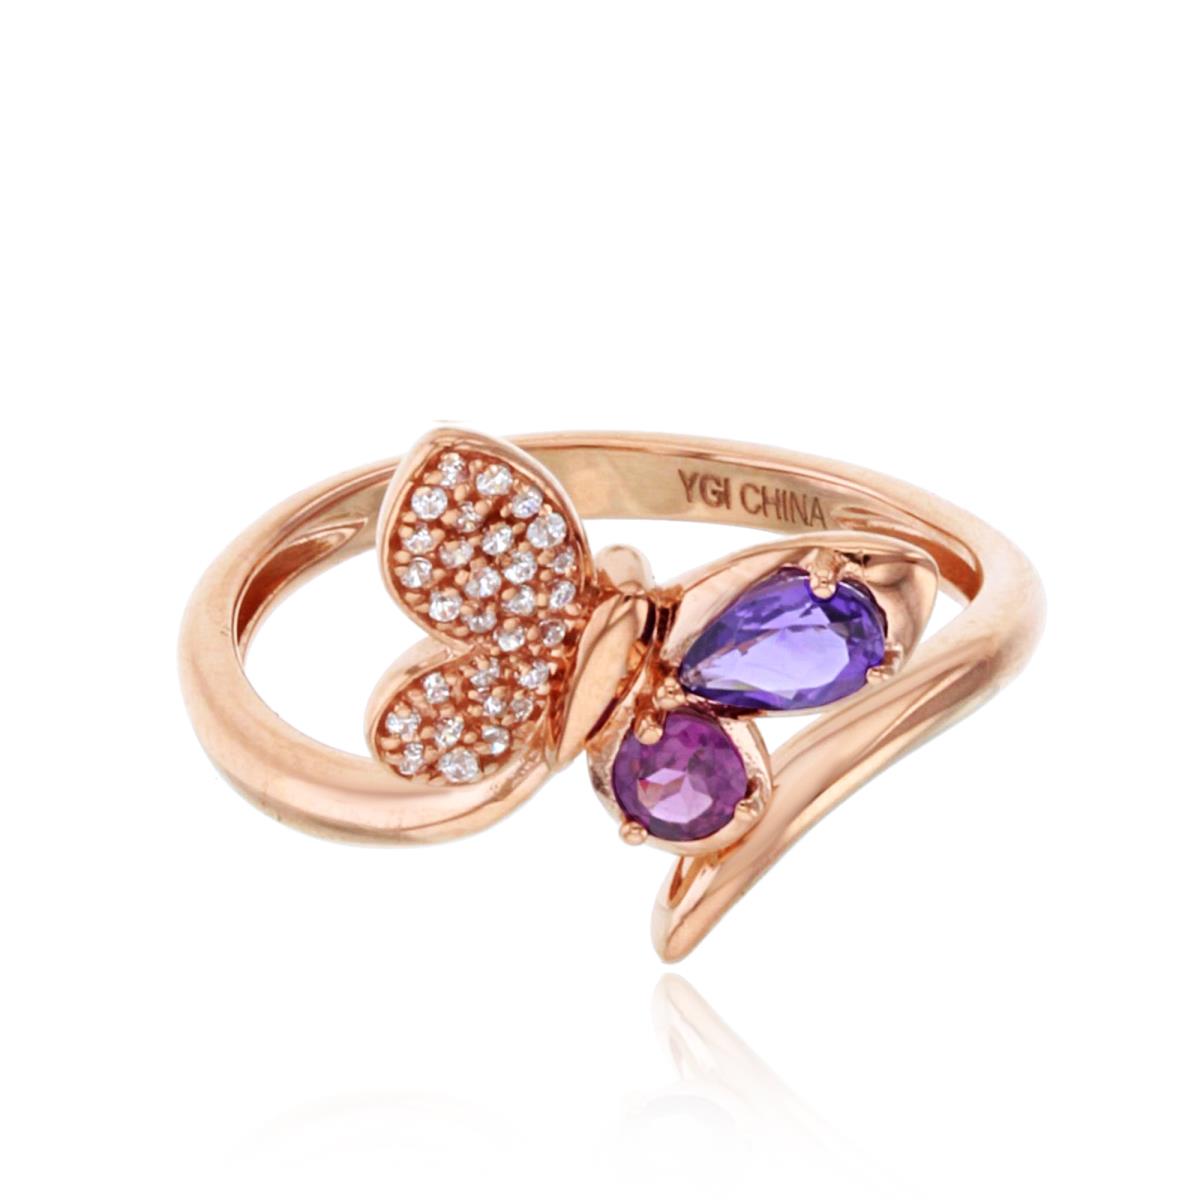 10K Rose Gold & Diamond and 5x3mm Ps Rhodolite,Rd Amethyst Butterfly Ring